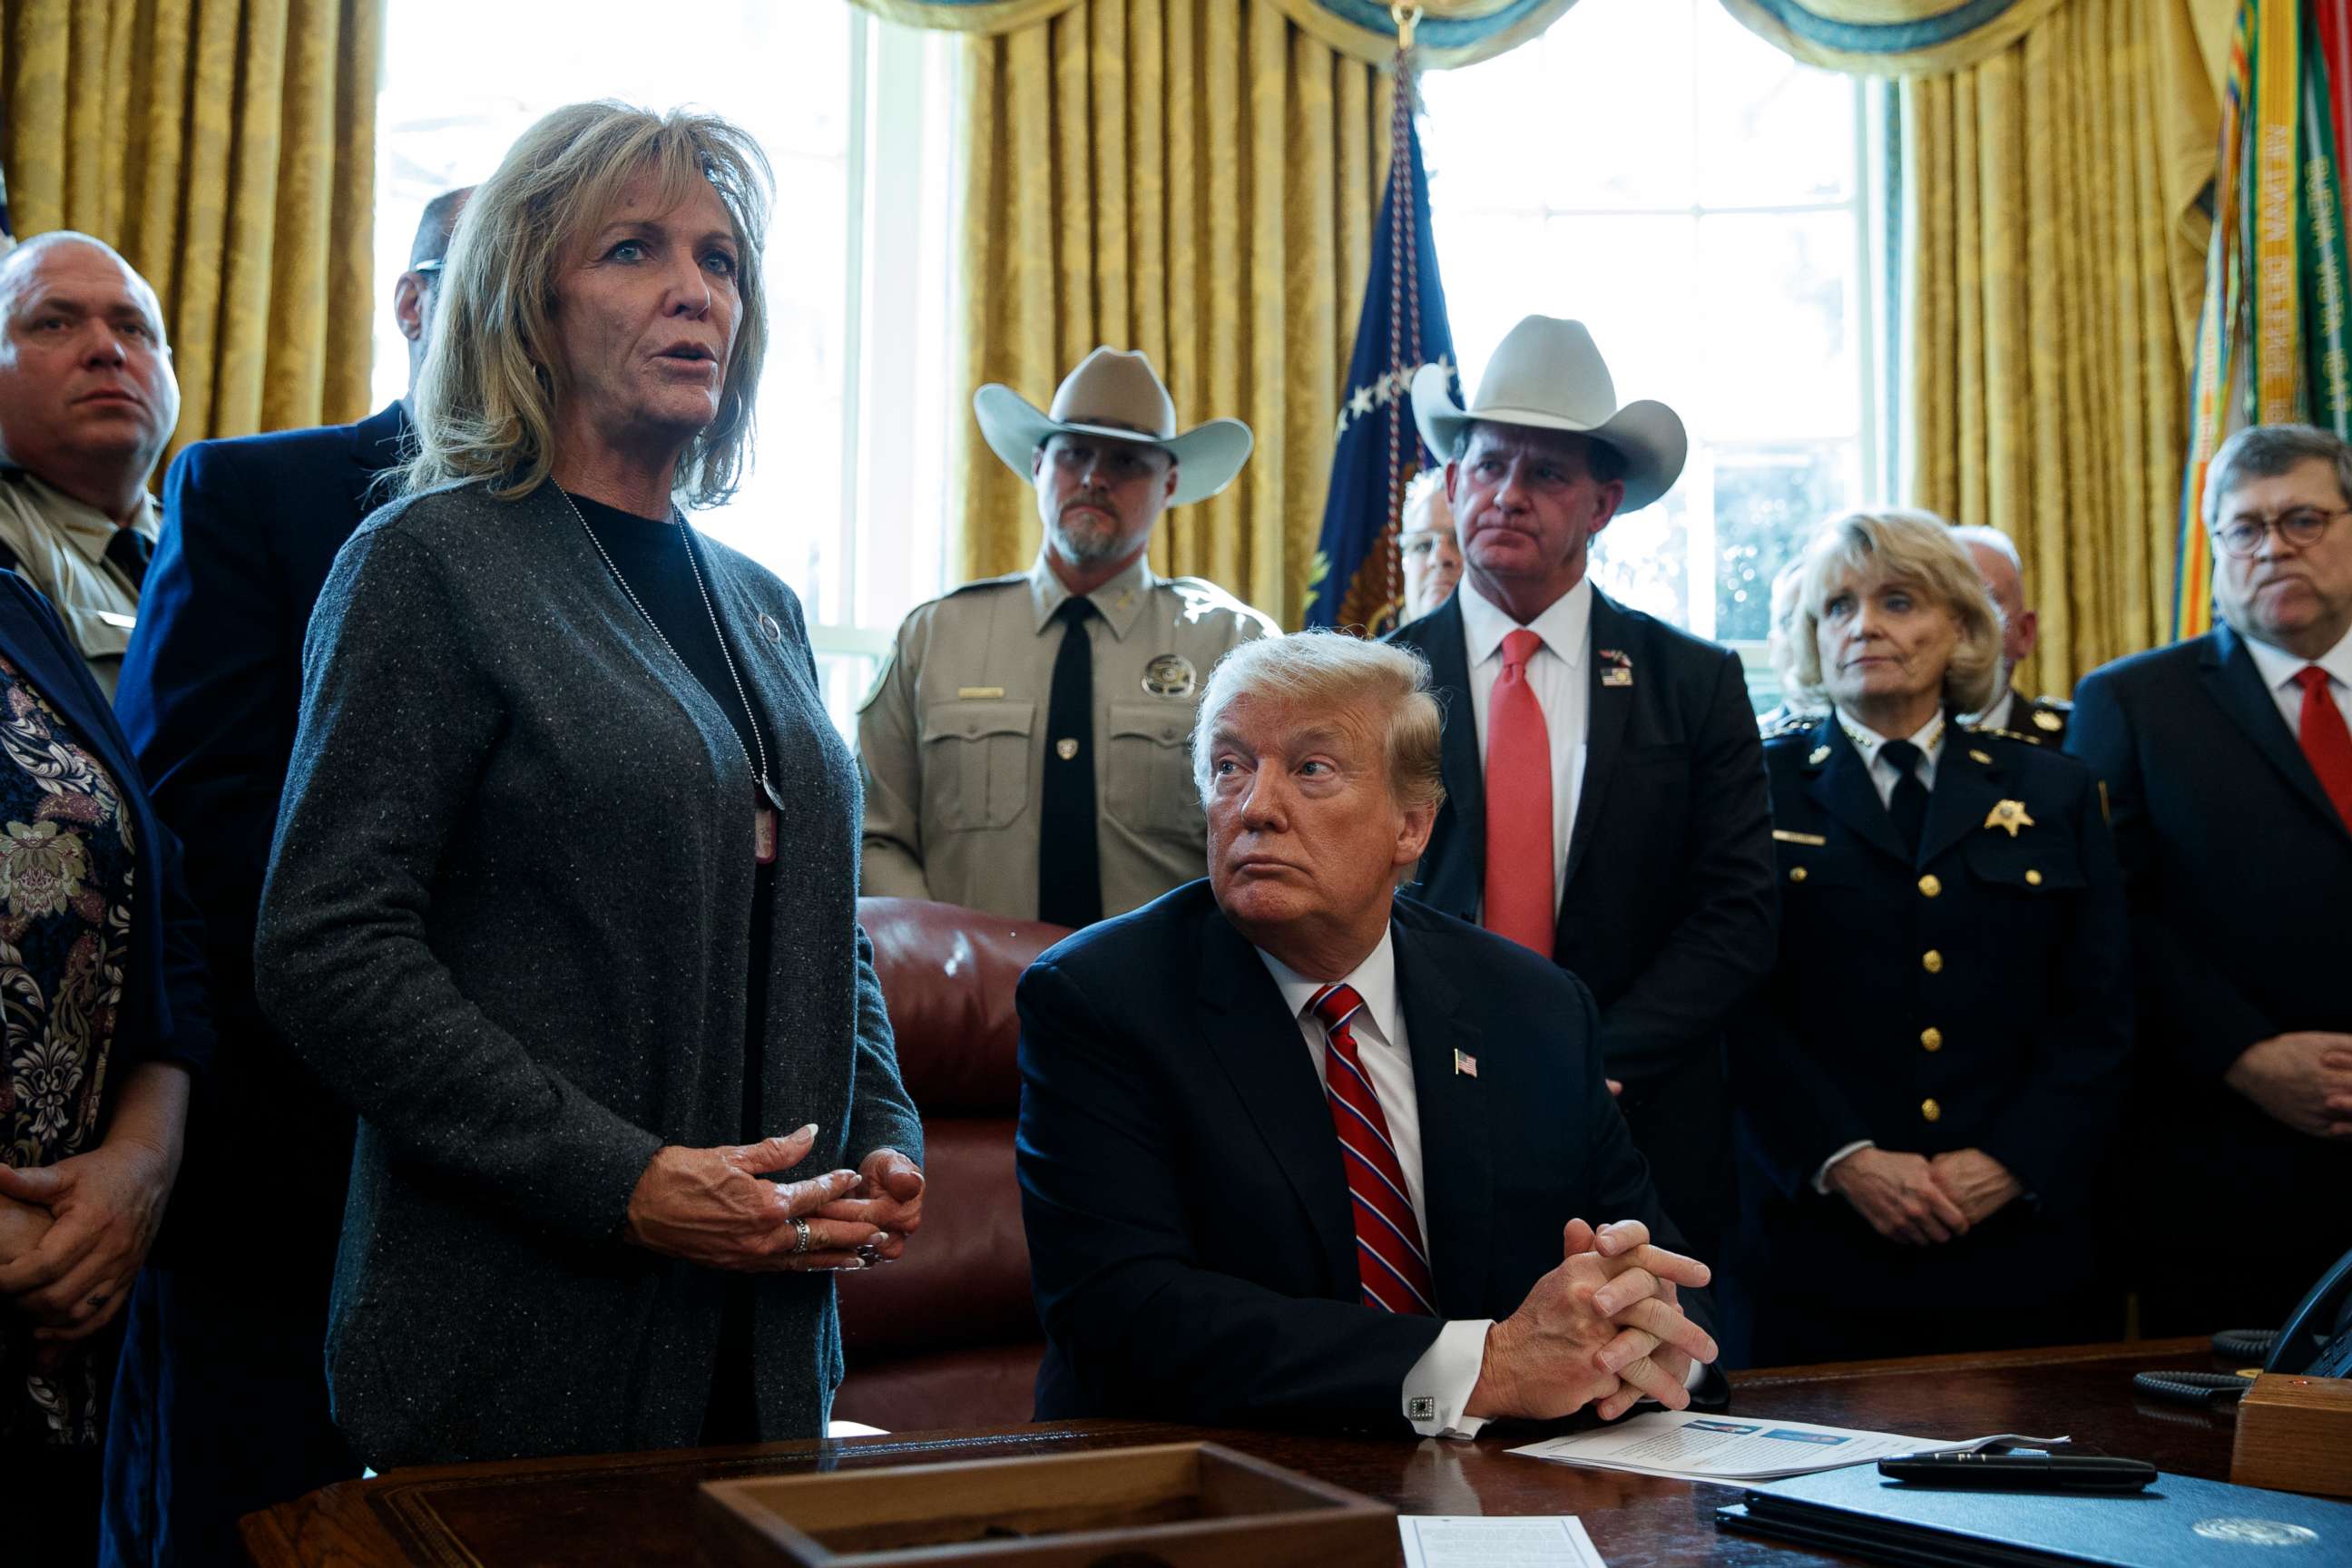 PHOTO: President Donald Trump listens as Mary Ann Mendoza, an "Angel Mom" who lost her son Brandon when he was killed by a drunk driver that was an undocumented immigrant, speaks in the Oval Office of the White House, March 15, 2019, in Washington.